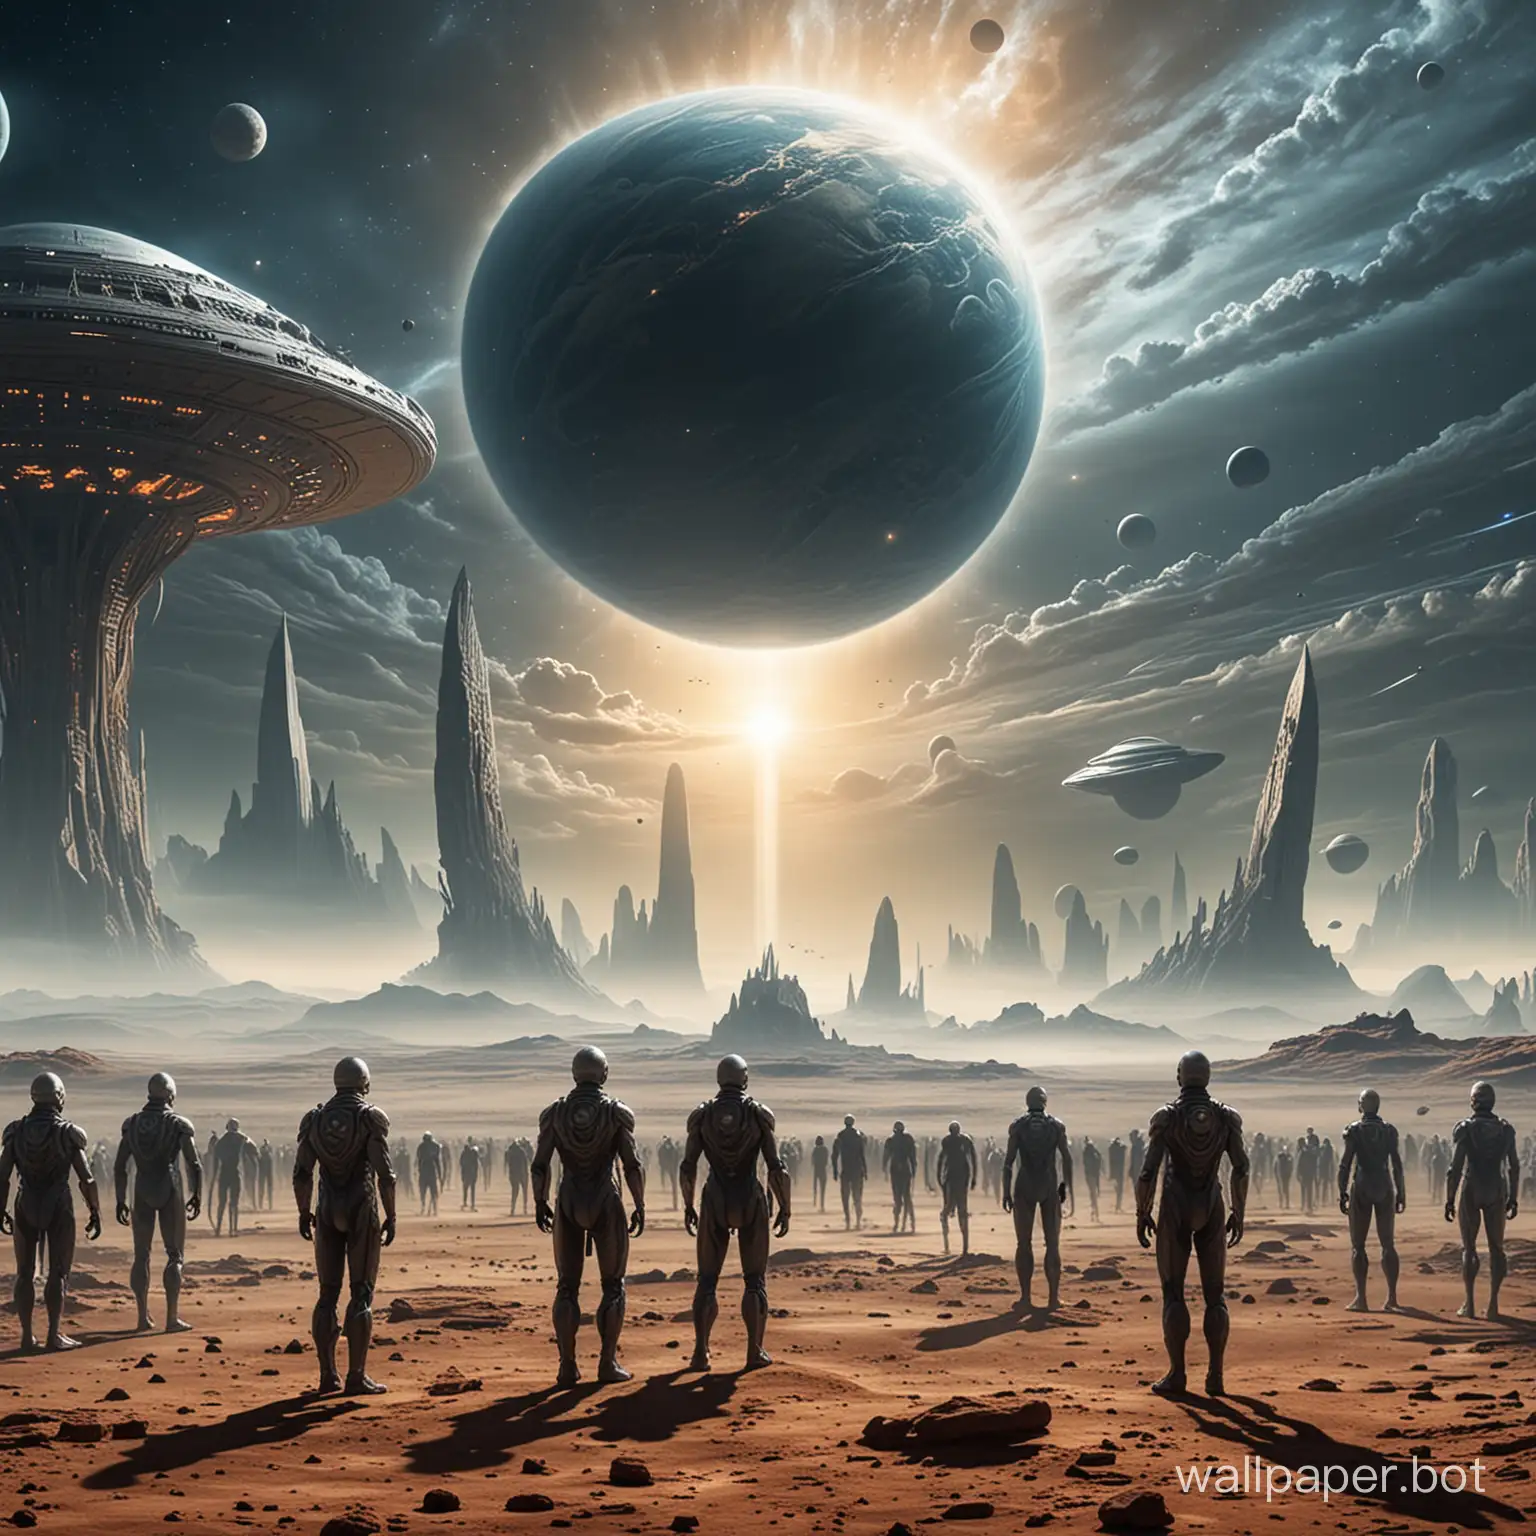 Meeting of Earthlings with an extraterrestrial civilization